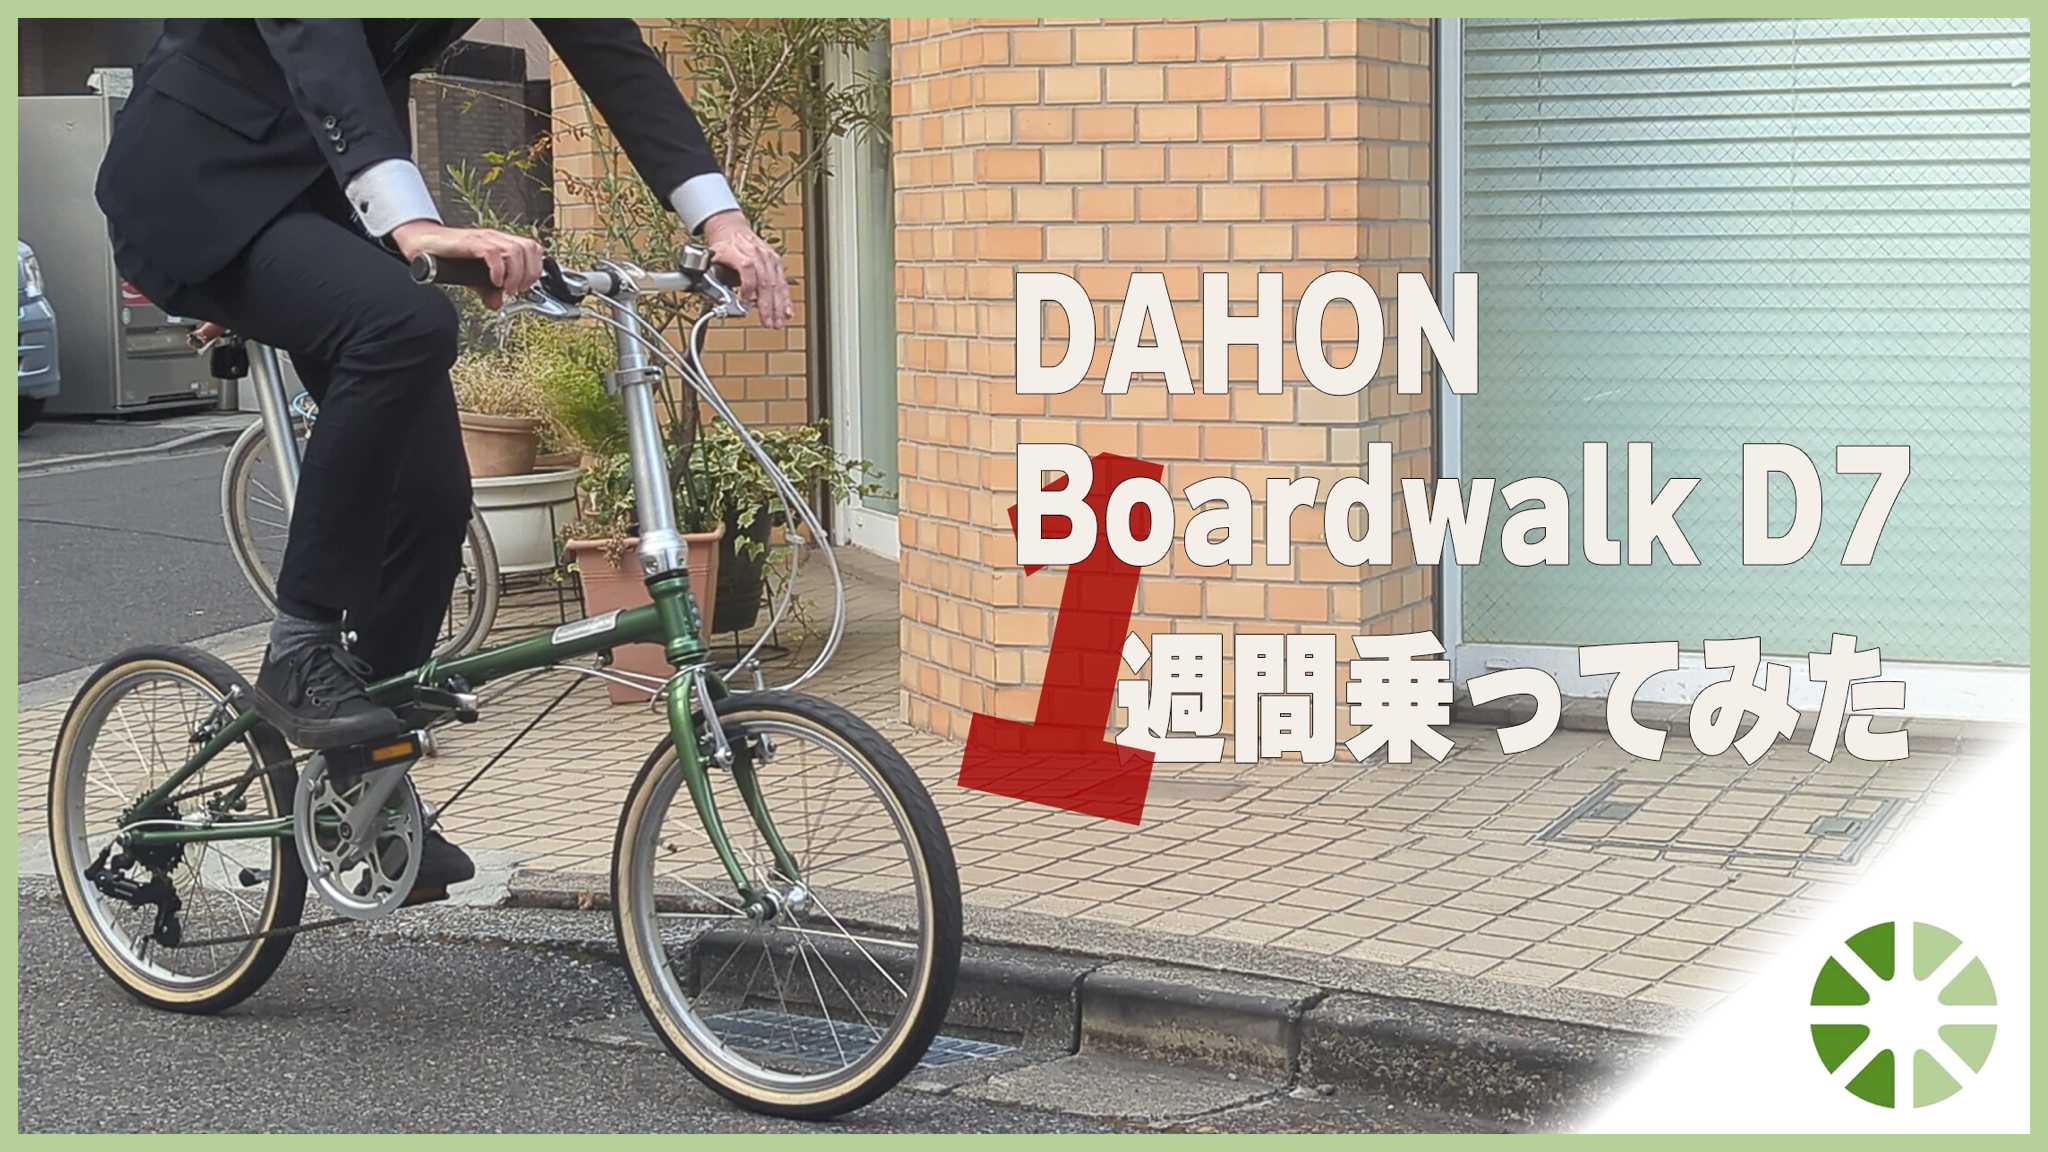 I cycled 100km with dahon boardwalk d7